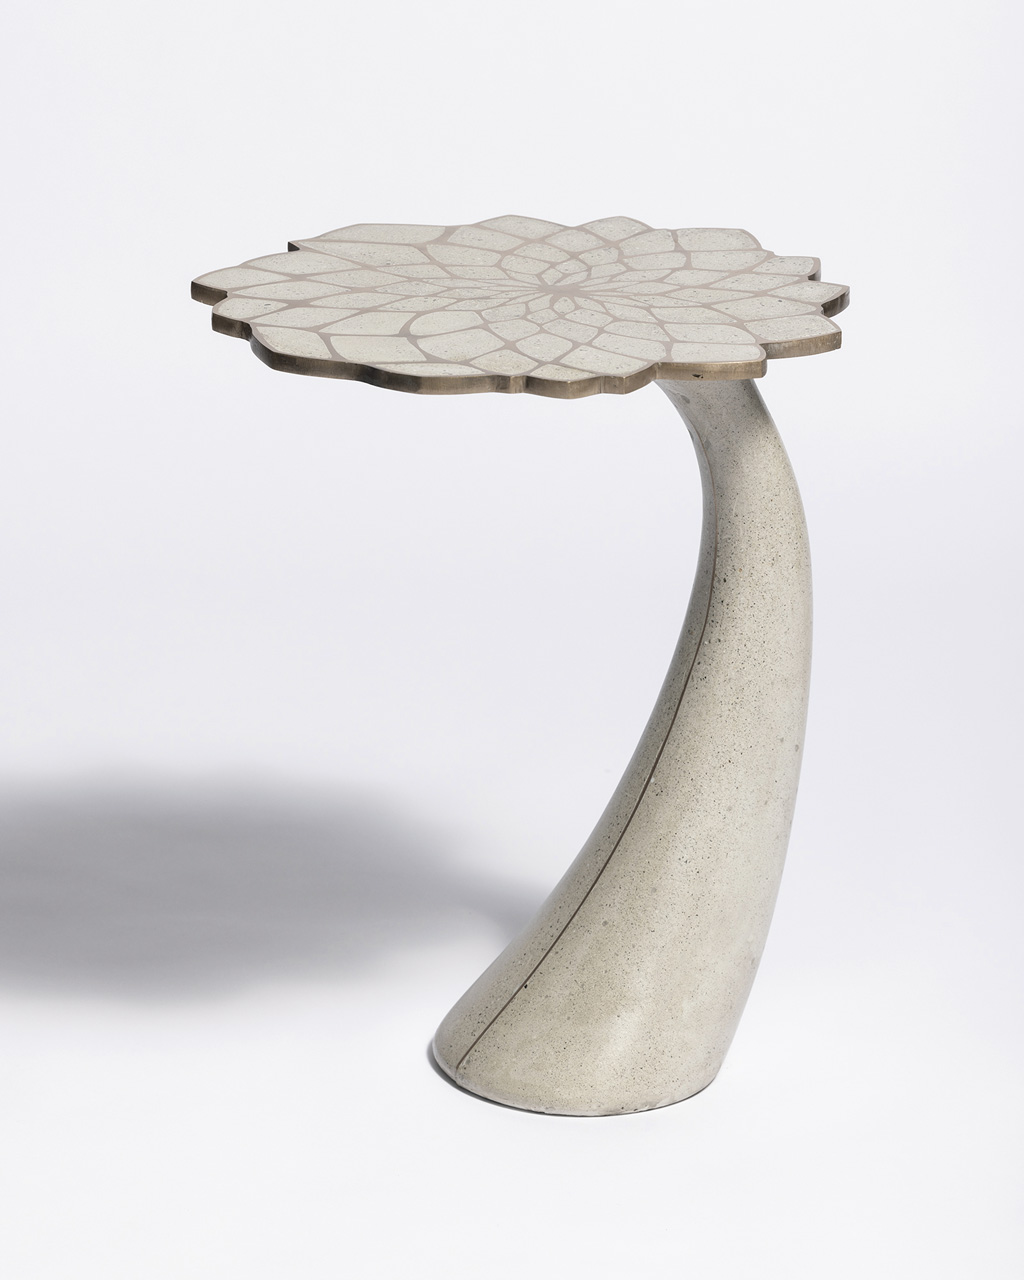 Moasiac Lily Exo table